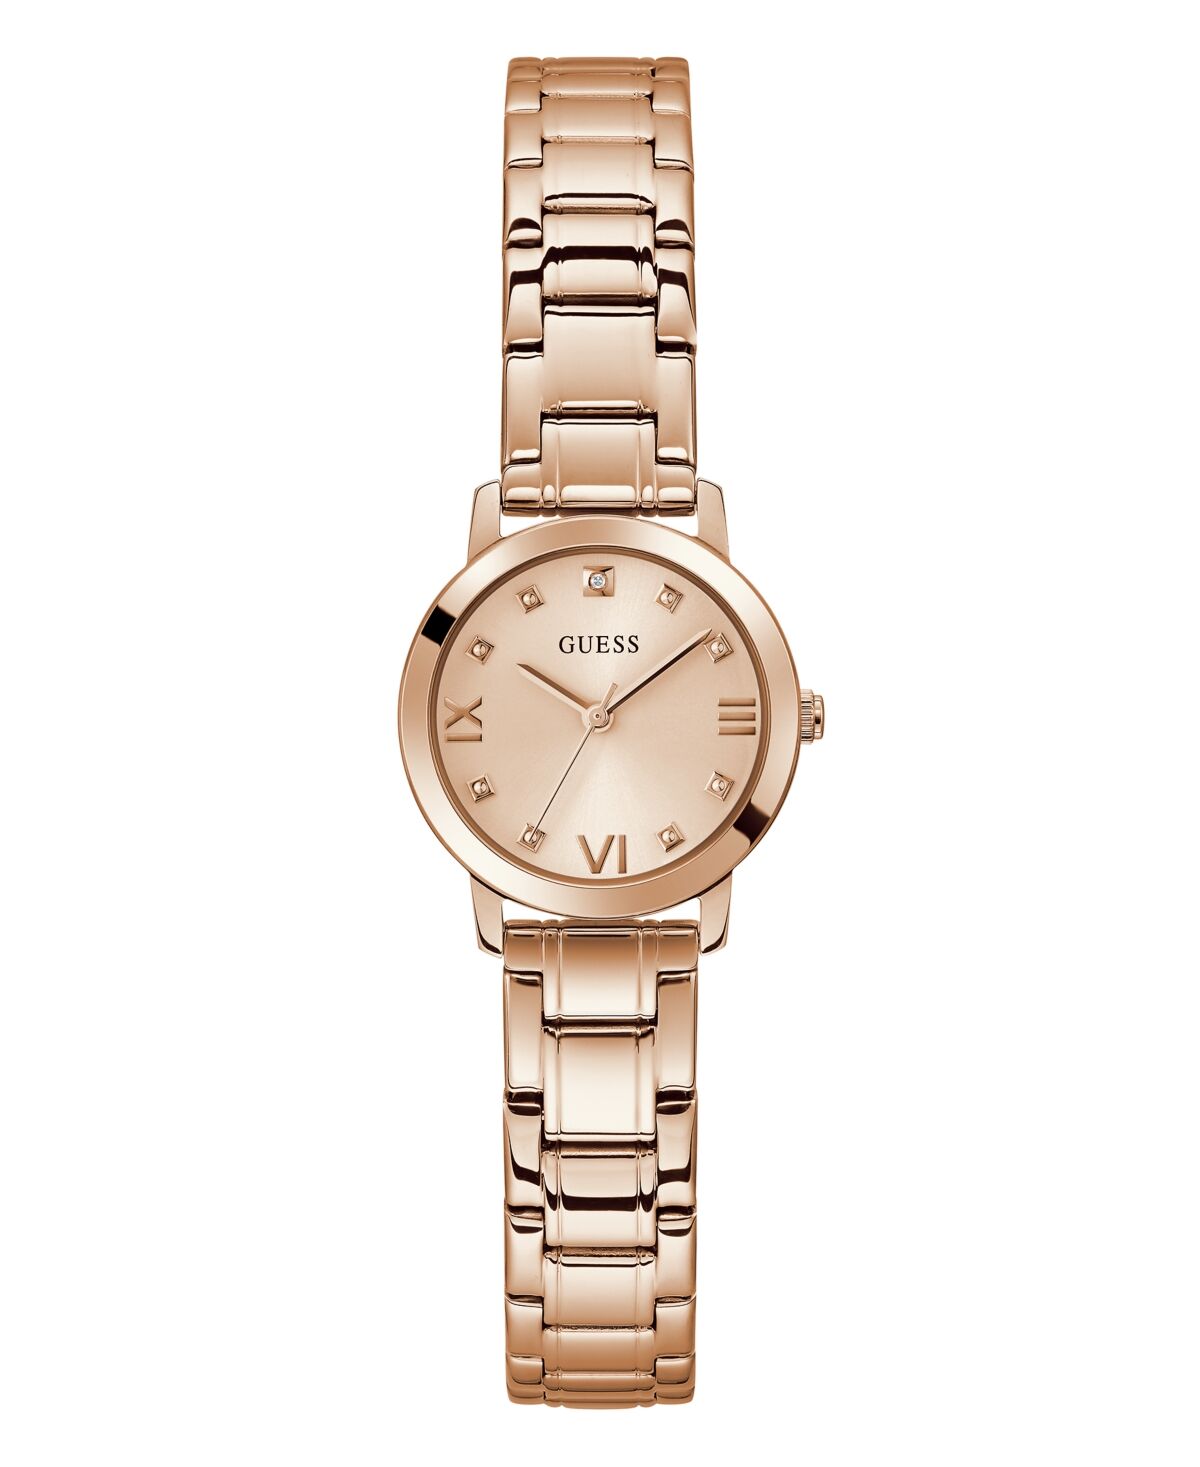 Guess Women's Three-Hand Rose Gold-Tone Stainless Steel Watch 28mm - Rose Gold-Tone